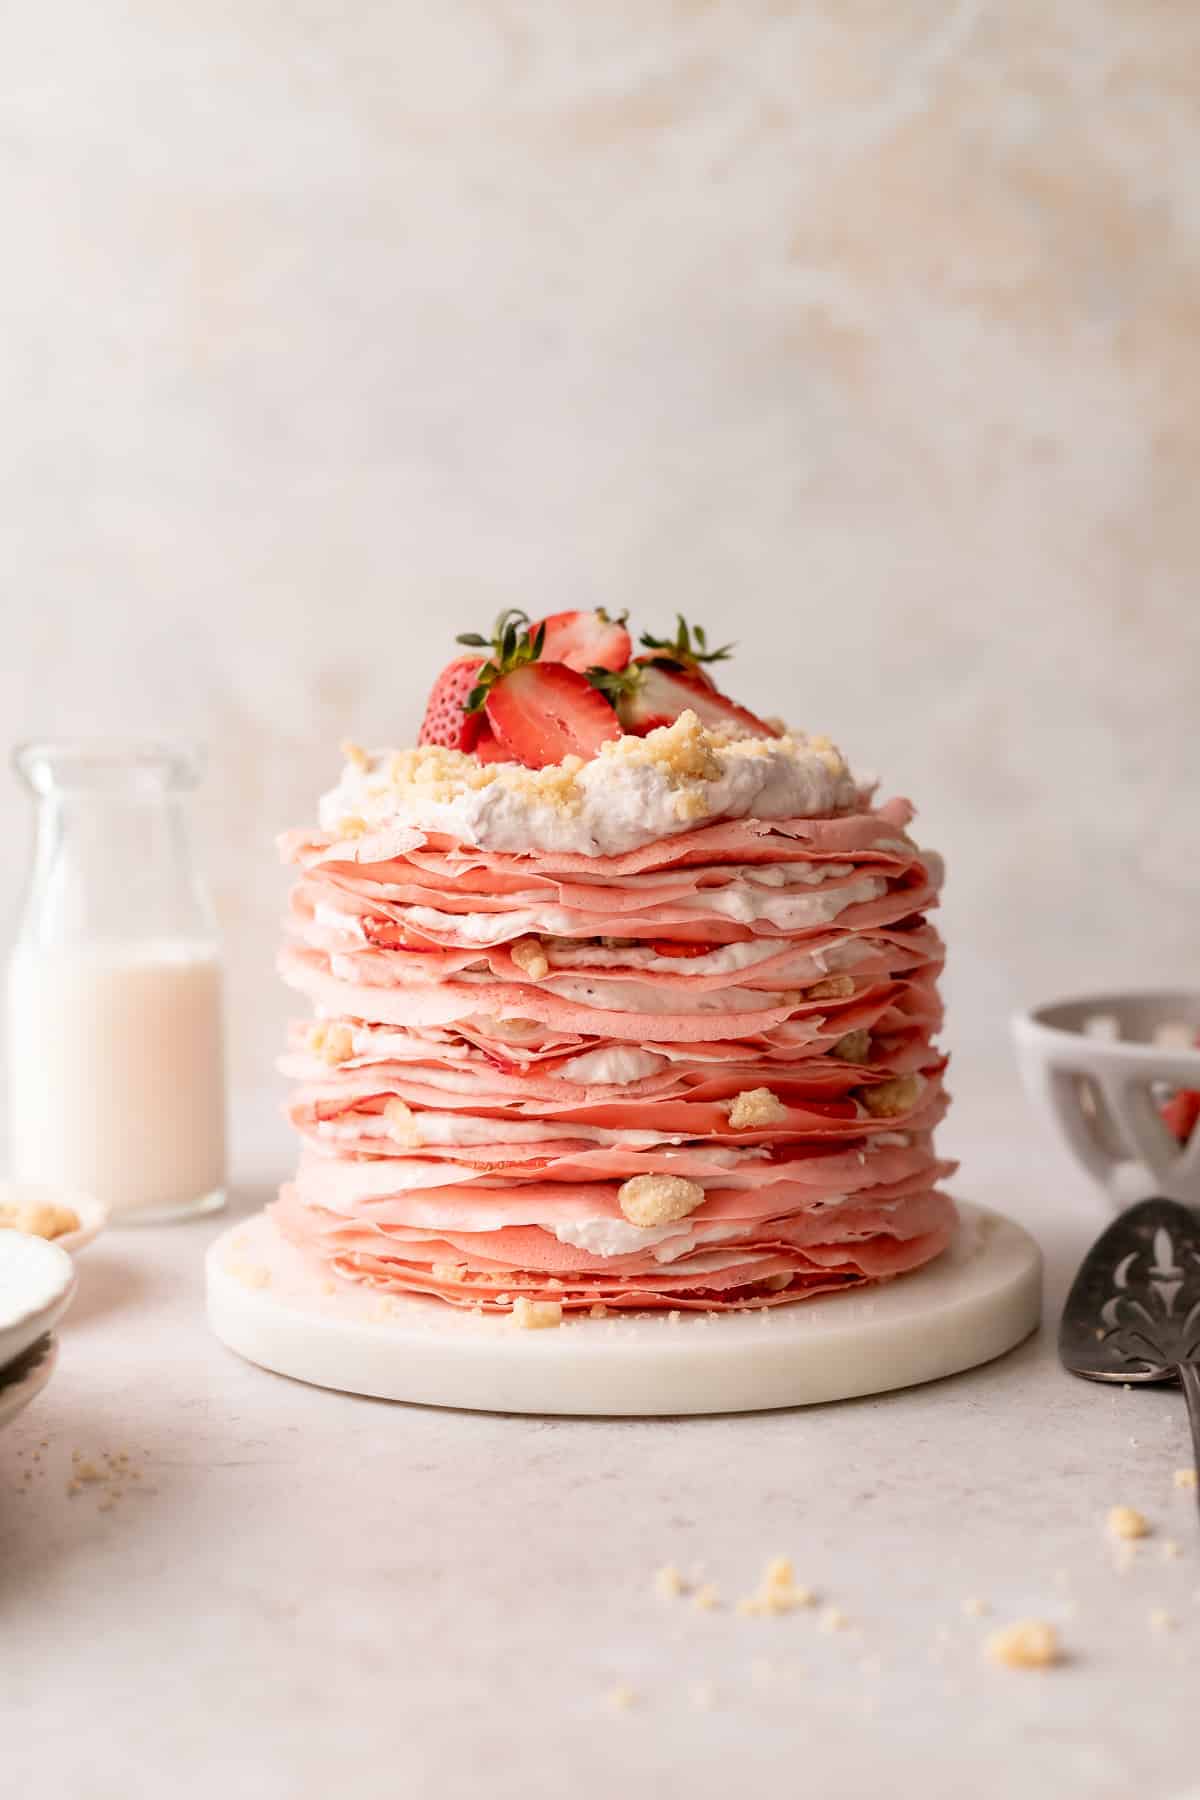 strawberry crepe cake topped with whipped cream and strawberries.